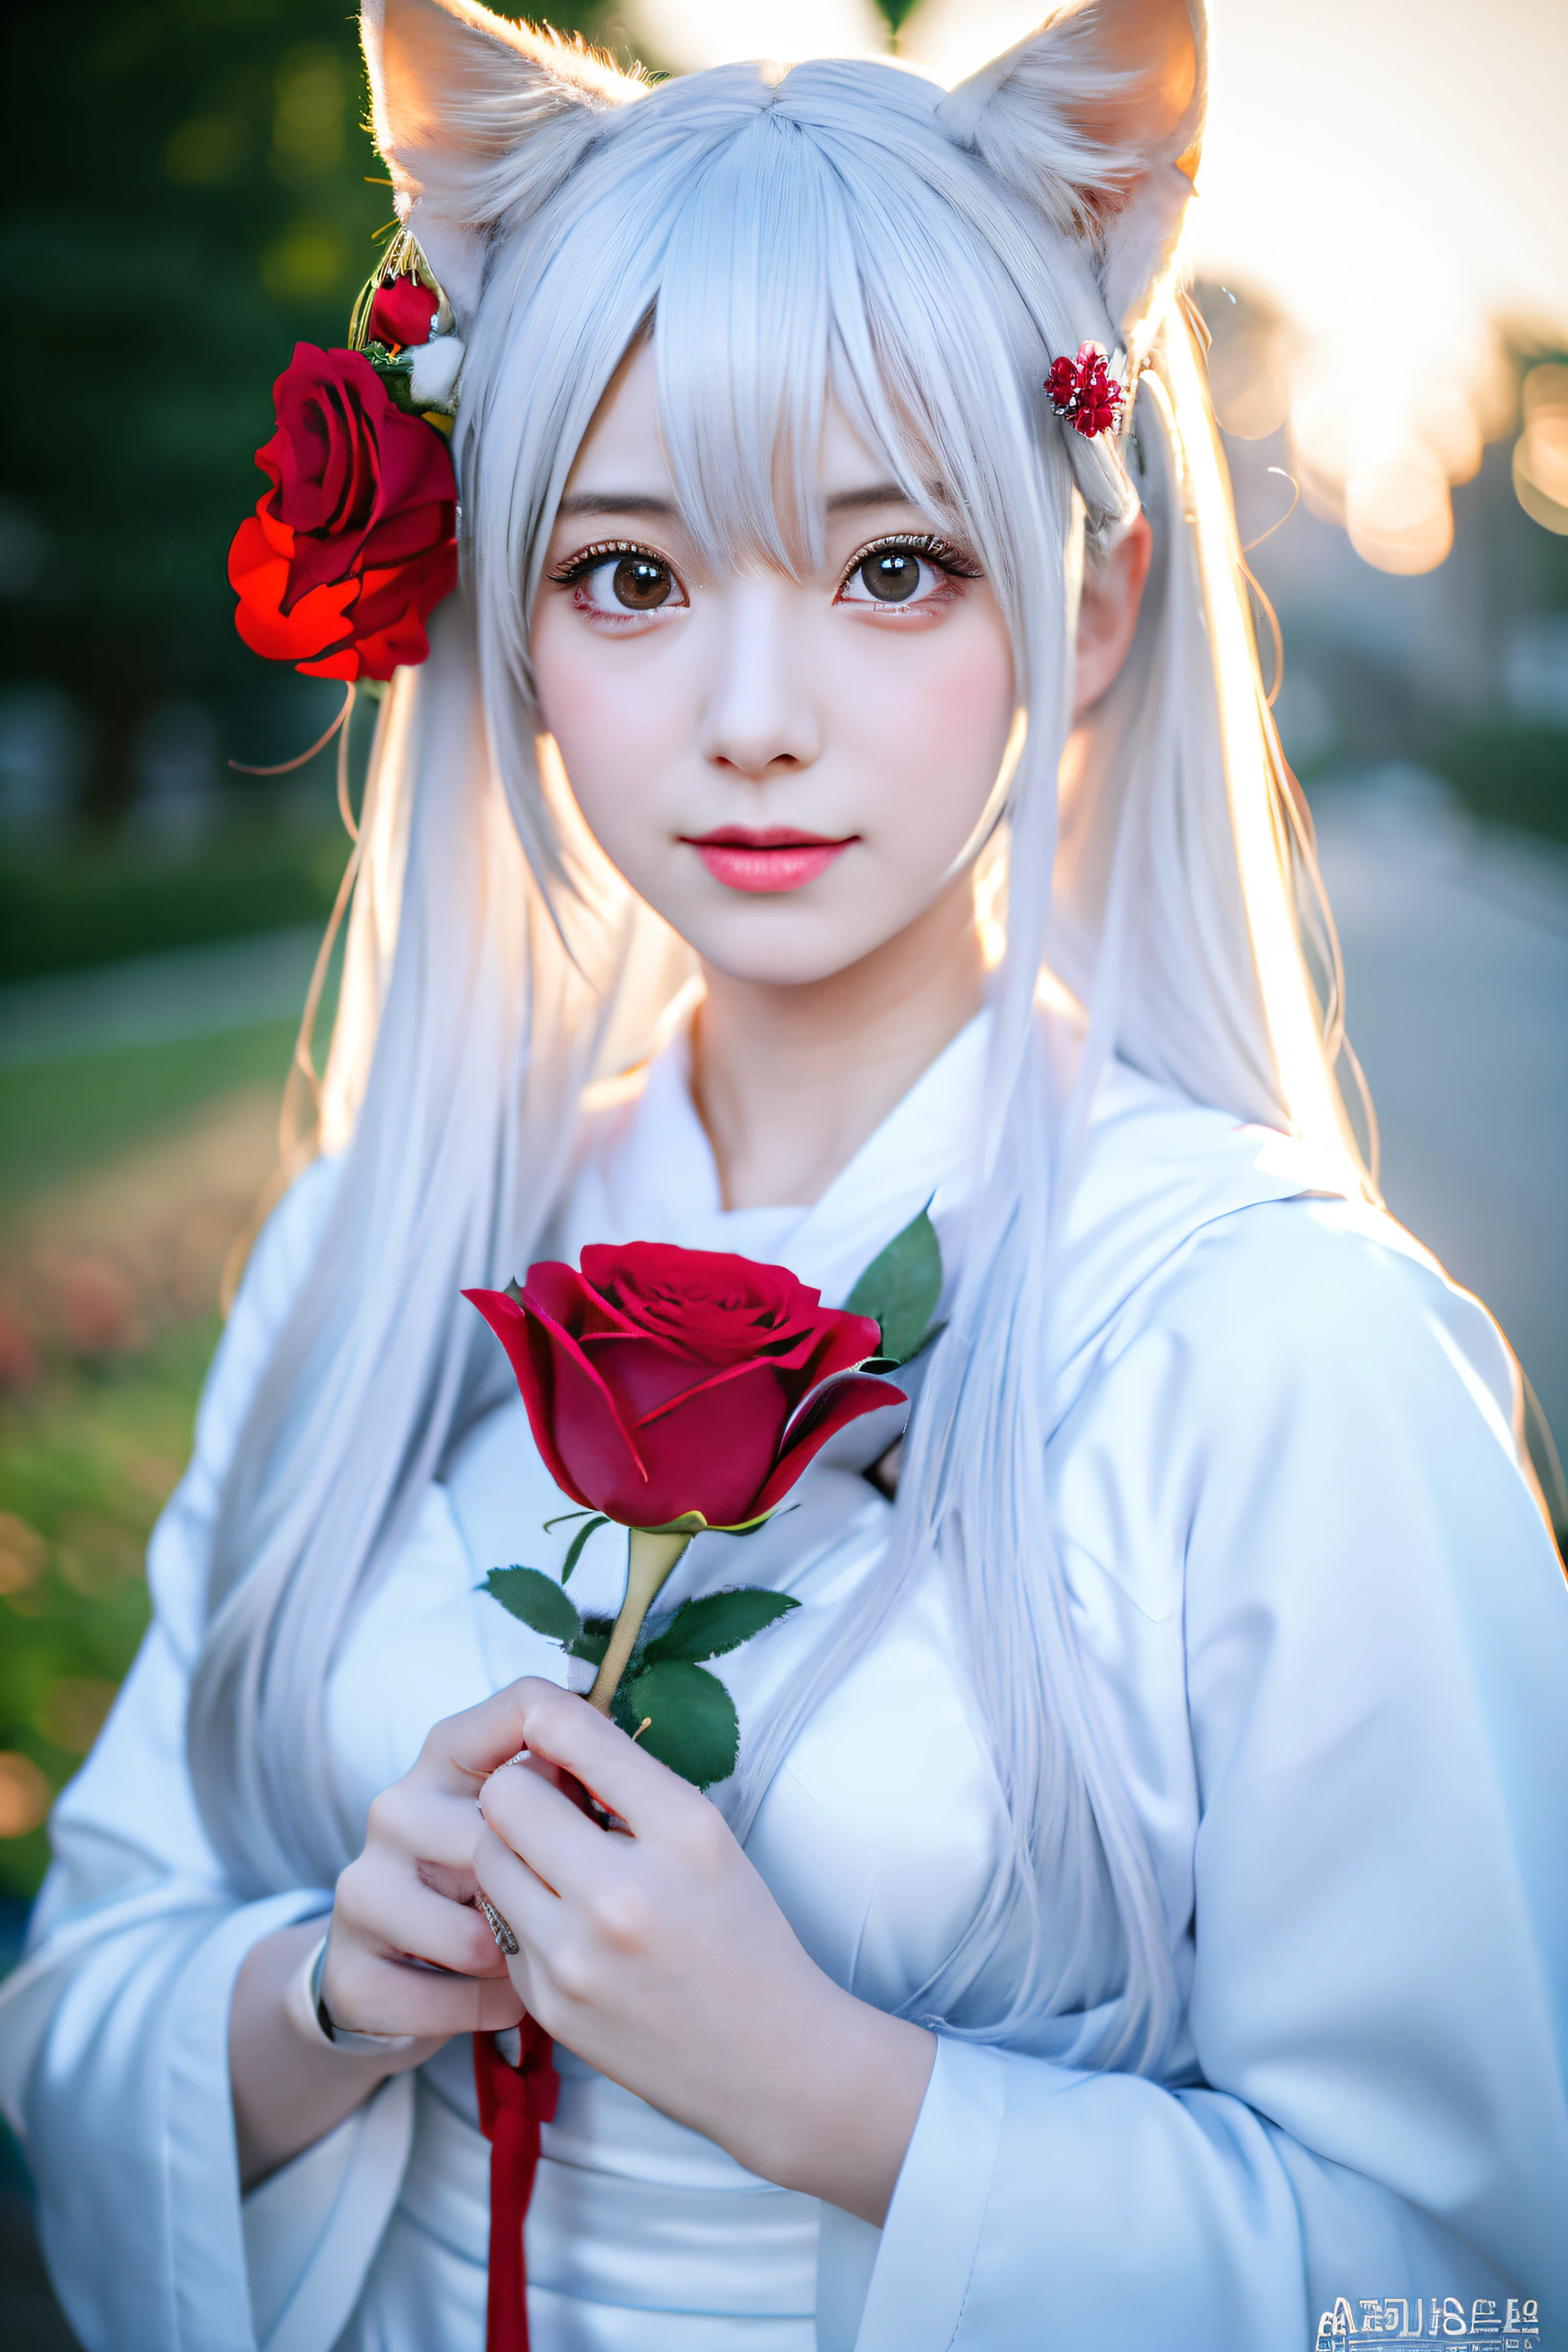 high-definition picture,Three girls，1 wearing a white dress、There is a woman with red roses in her hair, Anime Cosplay, Anime girl cosplay, cosplay foto, Real style mixed with Fujifilm, Cosplay,2 White haired god, a beautiful kitsune woman, cosplayer, White Cat Girl, Girl Silver Hair, Nekomimi, 3 real life anime girls, Ayaka Cosplay, white hime cut hairstyle